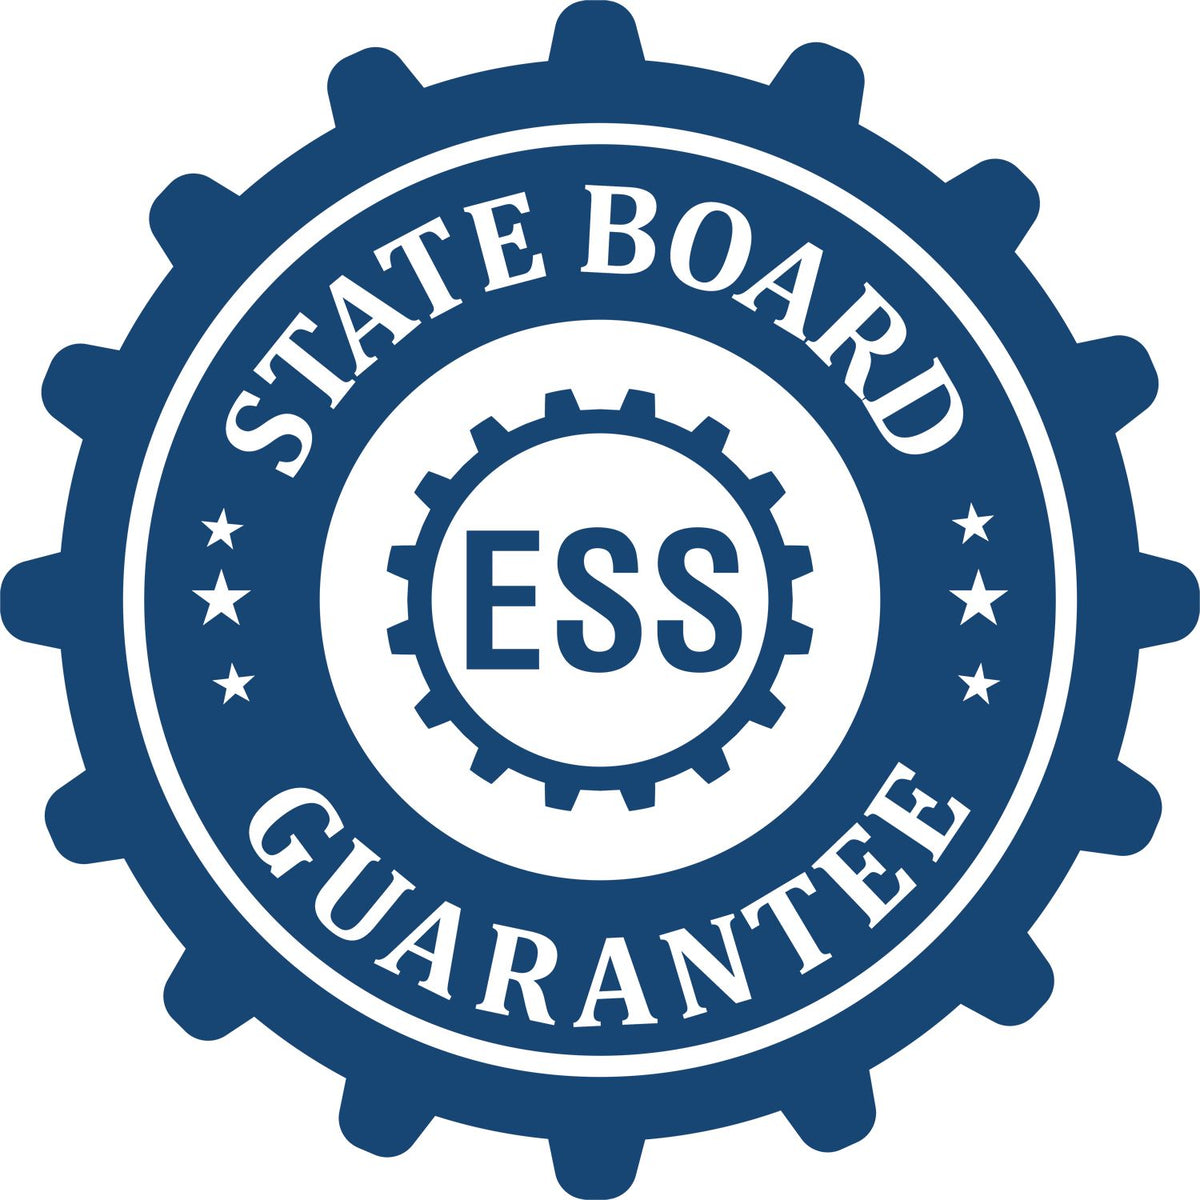 An emblem in a gear shape illustrating a state board guarantee for the State of Louisiana Long Reach Architectural Embossing Seal product.